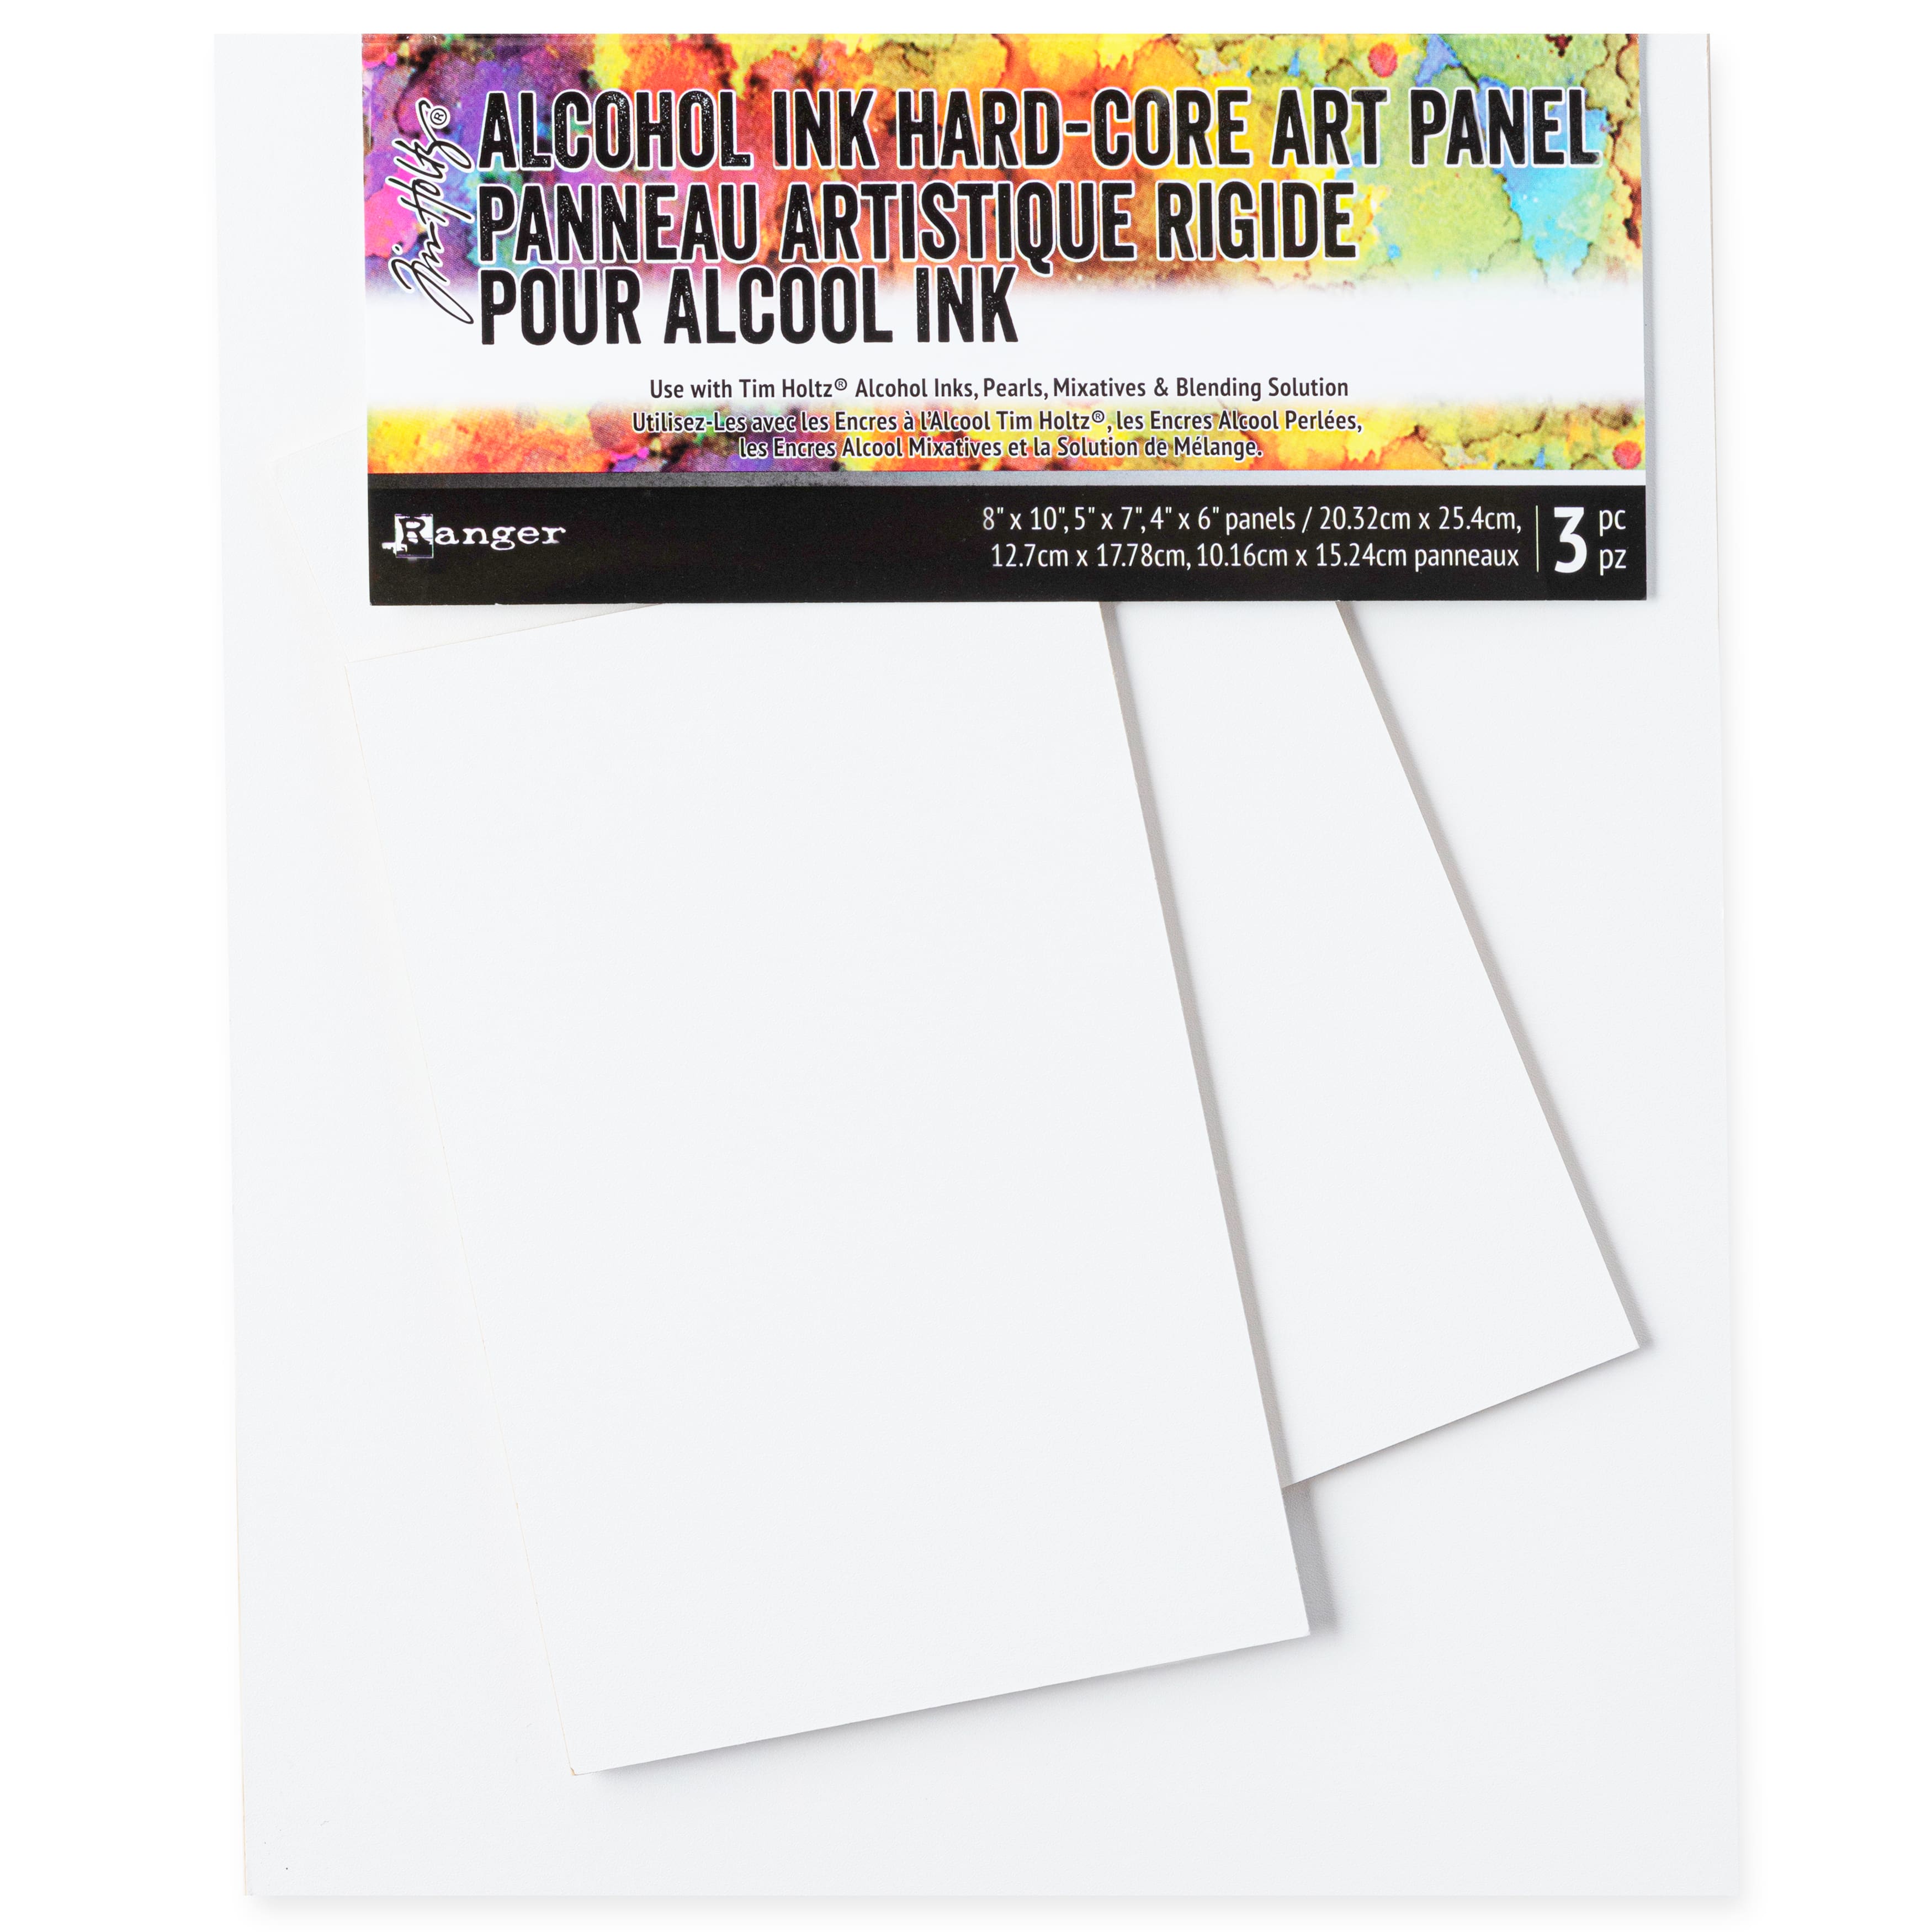 CRAFT COUNTY Alcohol Ink Art Panels – 3 Piece Double-Sided 4 Inch Hexagon -  Vinyl Hard-Core MDF Board, 1/8 Inch Thick : : Everything Else